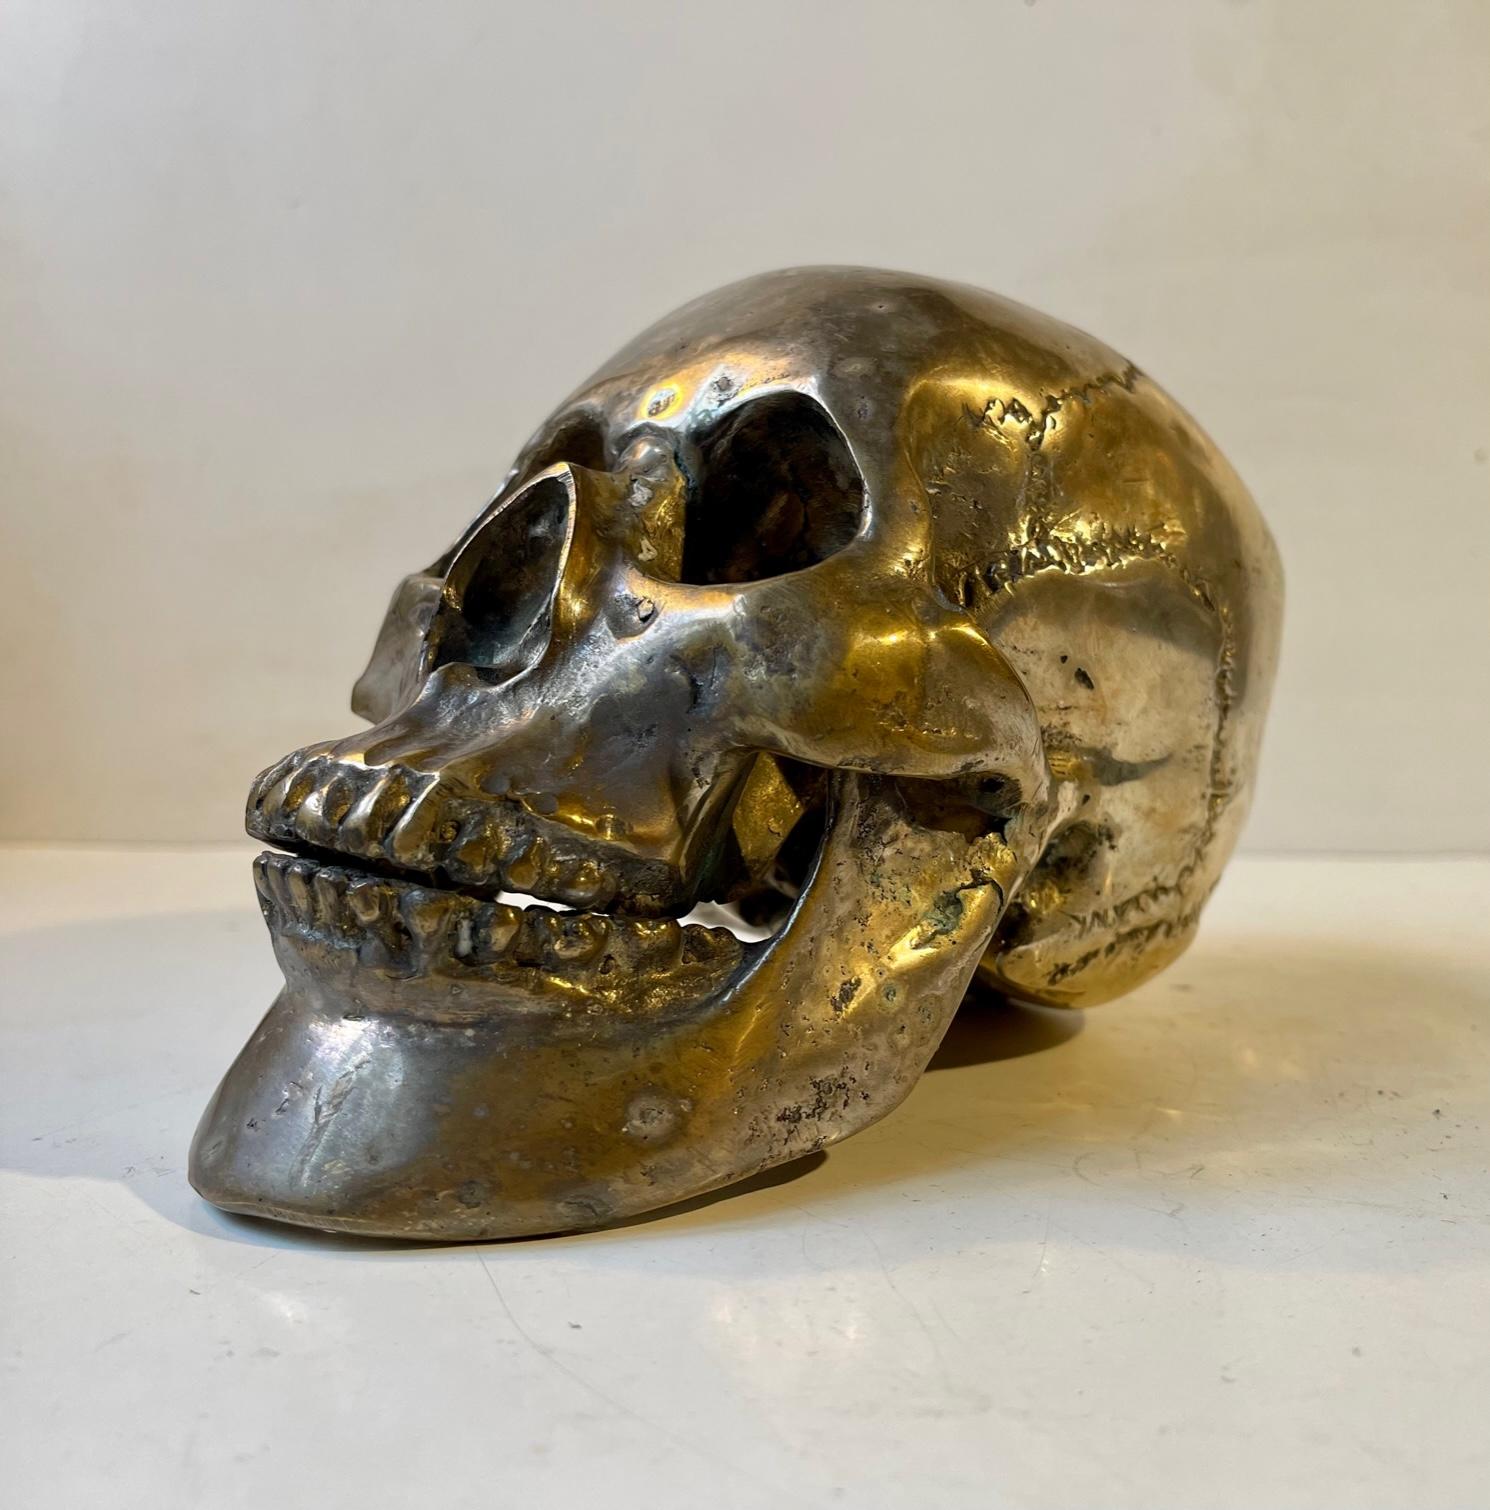 A 1:1 cast model of a human skull in silver plated bronze. Its made from a cast of a real human skull, probably female, and is complete with teeth, lower- and upper jaw. This particular example shows patina and ware. It has been polished over the